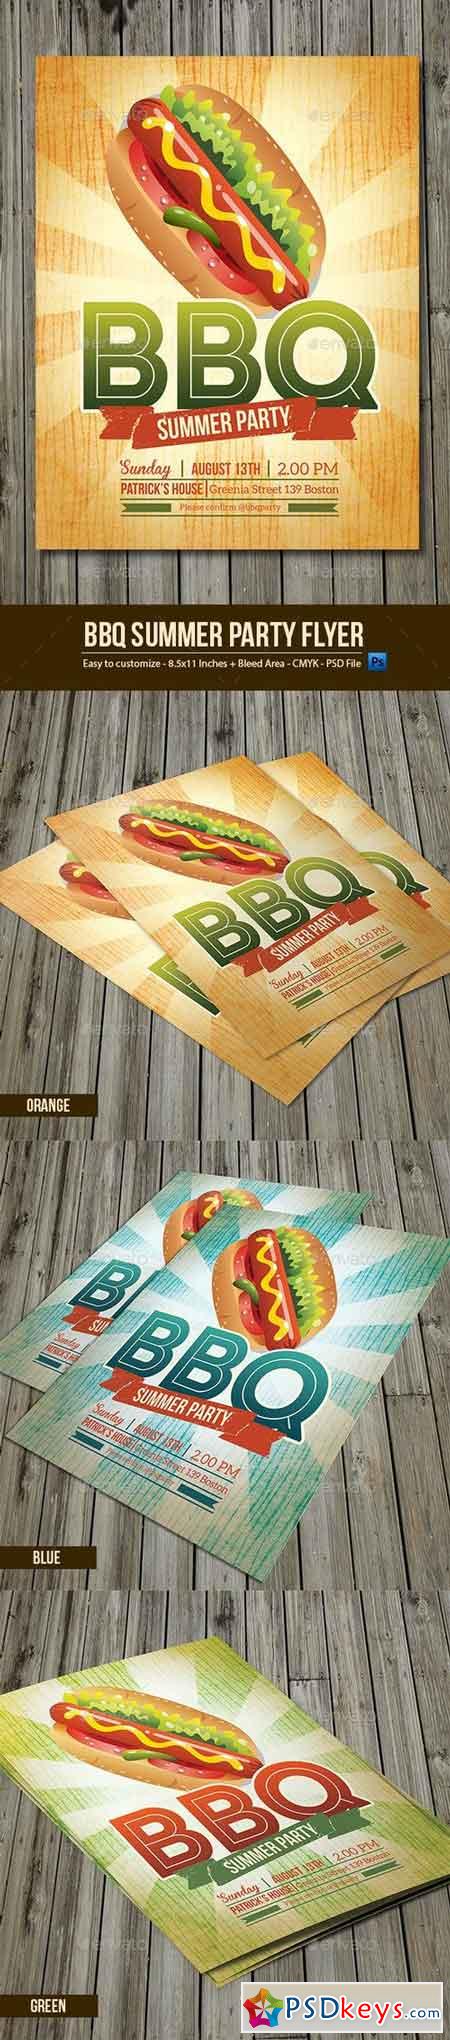 BBQ Summer Party Flyer 9997740